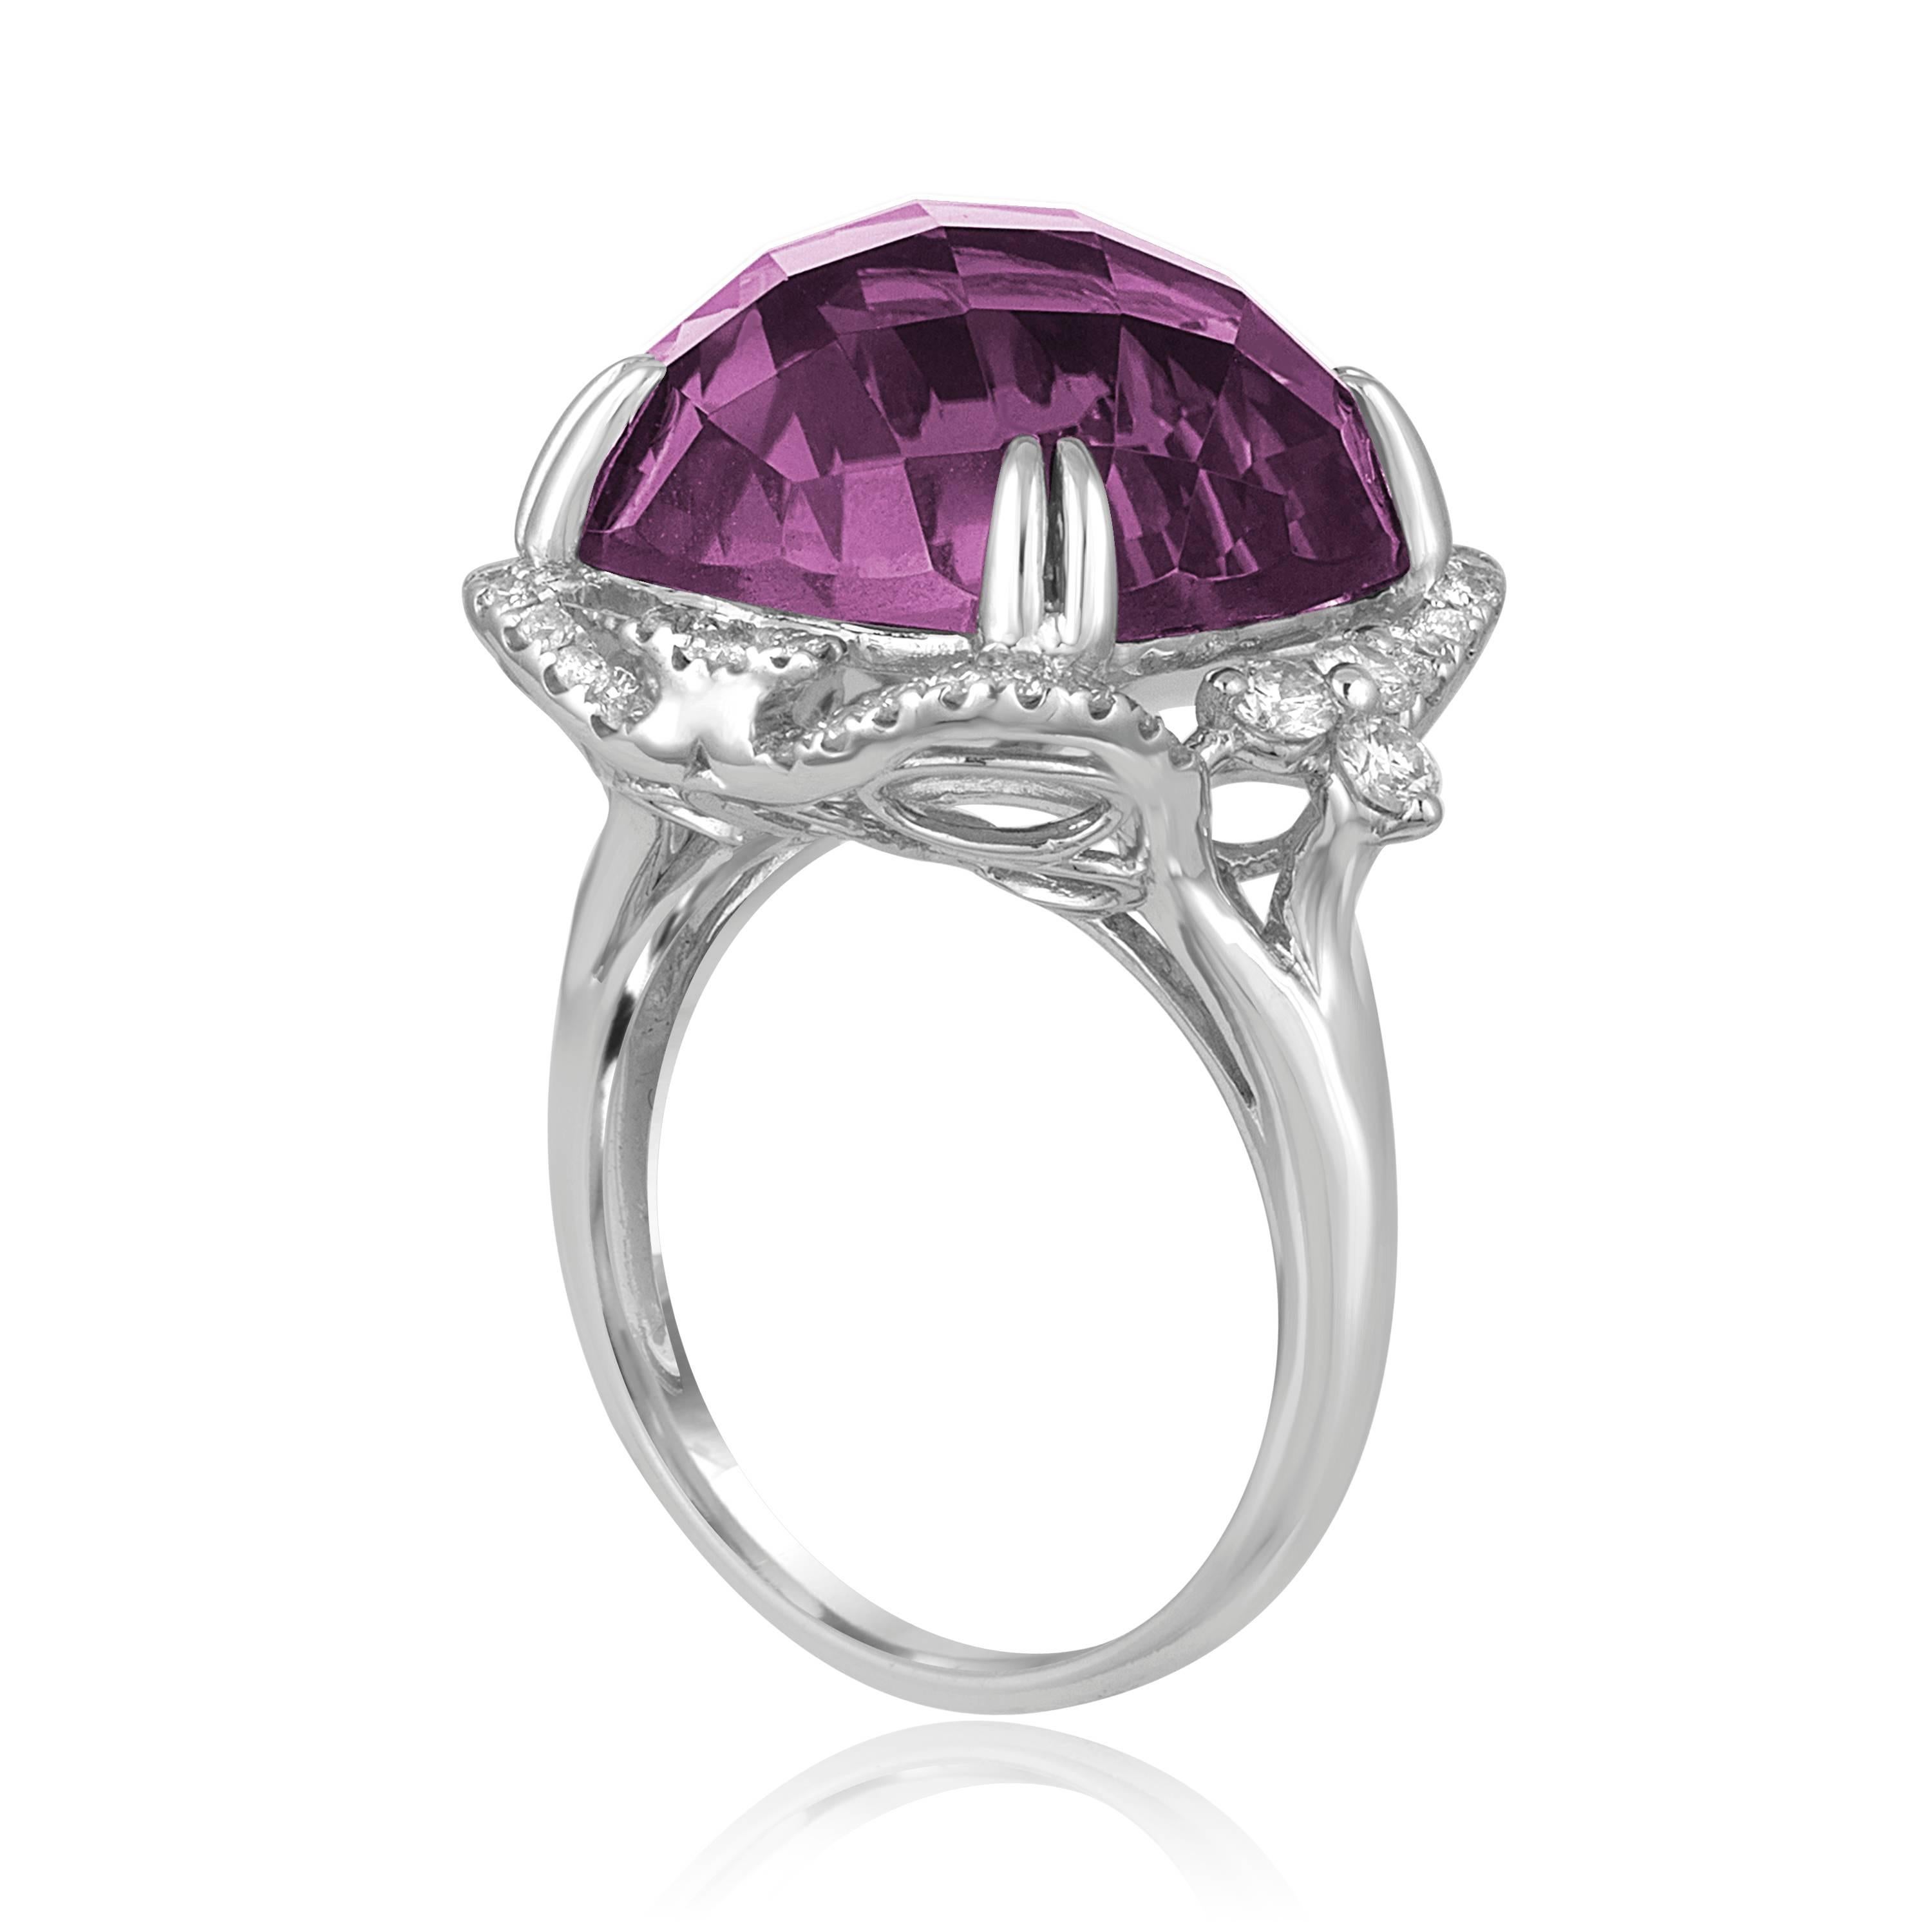 Fun Large Ring.
The ring is 18K White Gold.
There are 0.58 Carats in Diamonds F SI.
The Amethyst is 15.48 Carats .
The top measures 0.75